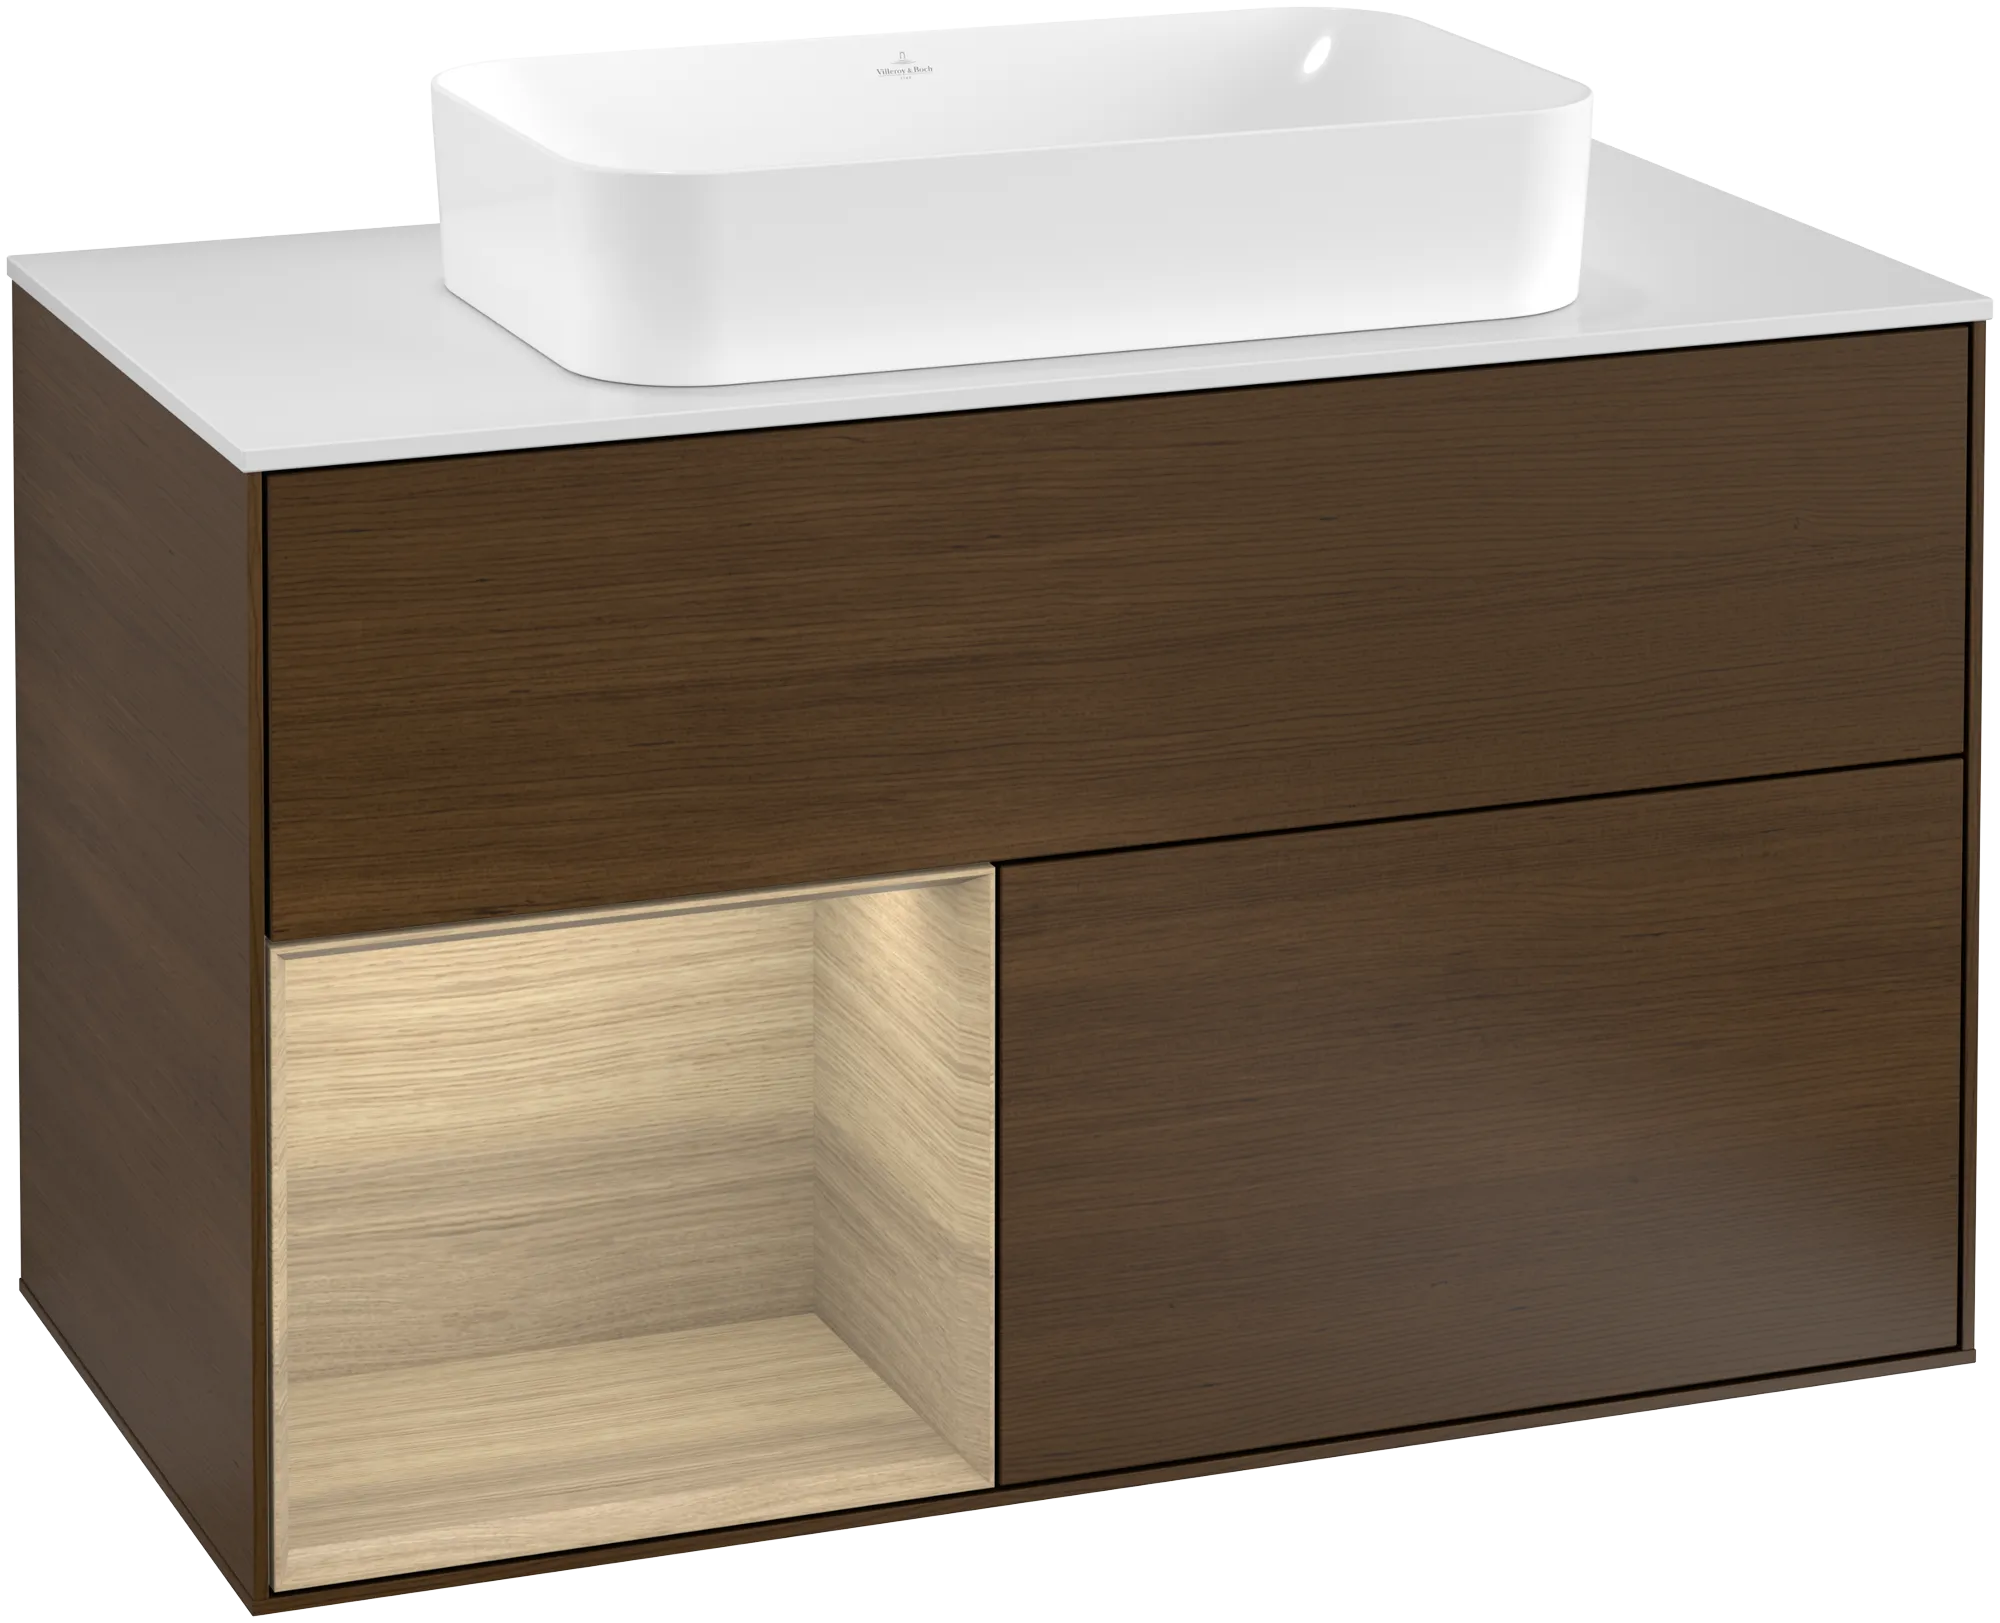 Picture of VILLEROY BOCH Finion Vanity unit, with lighting, 2 pull-out compartments, 1000 x 603 x 501 mm, Walnut Veneer / Oak Veneer / Glass White Matt #G241PCGN